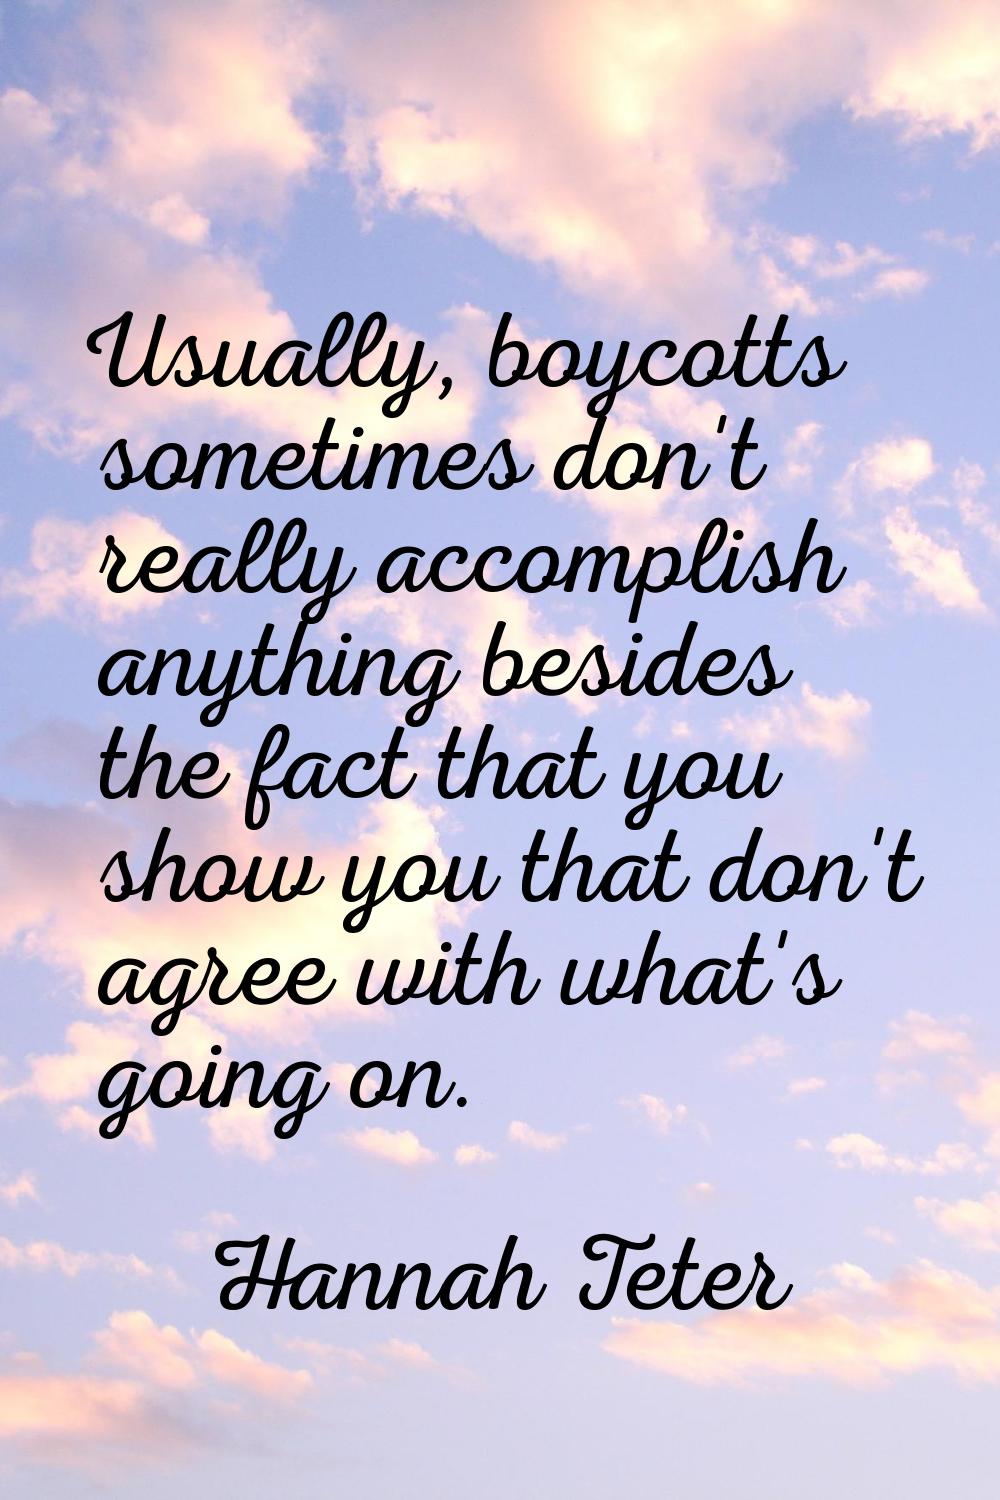 Usually, boycotts sometimes don't really accomplish anything besides the fact that you show you tha